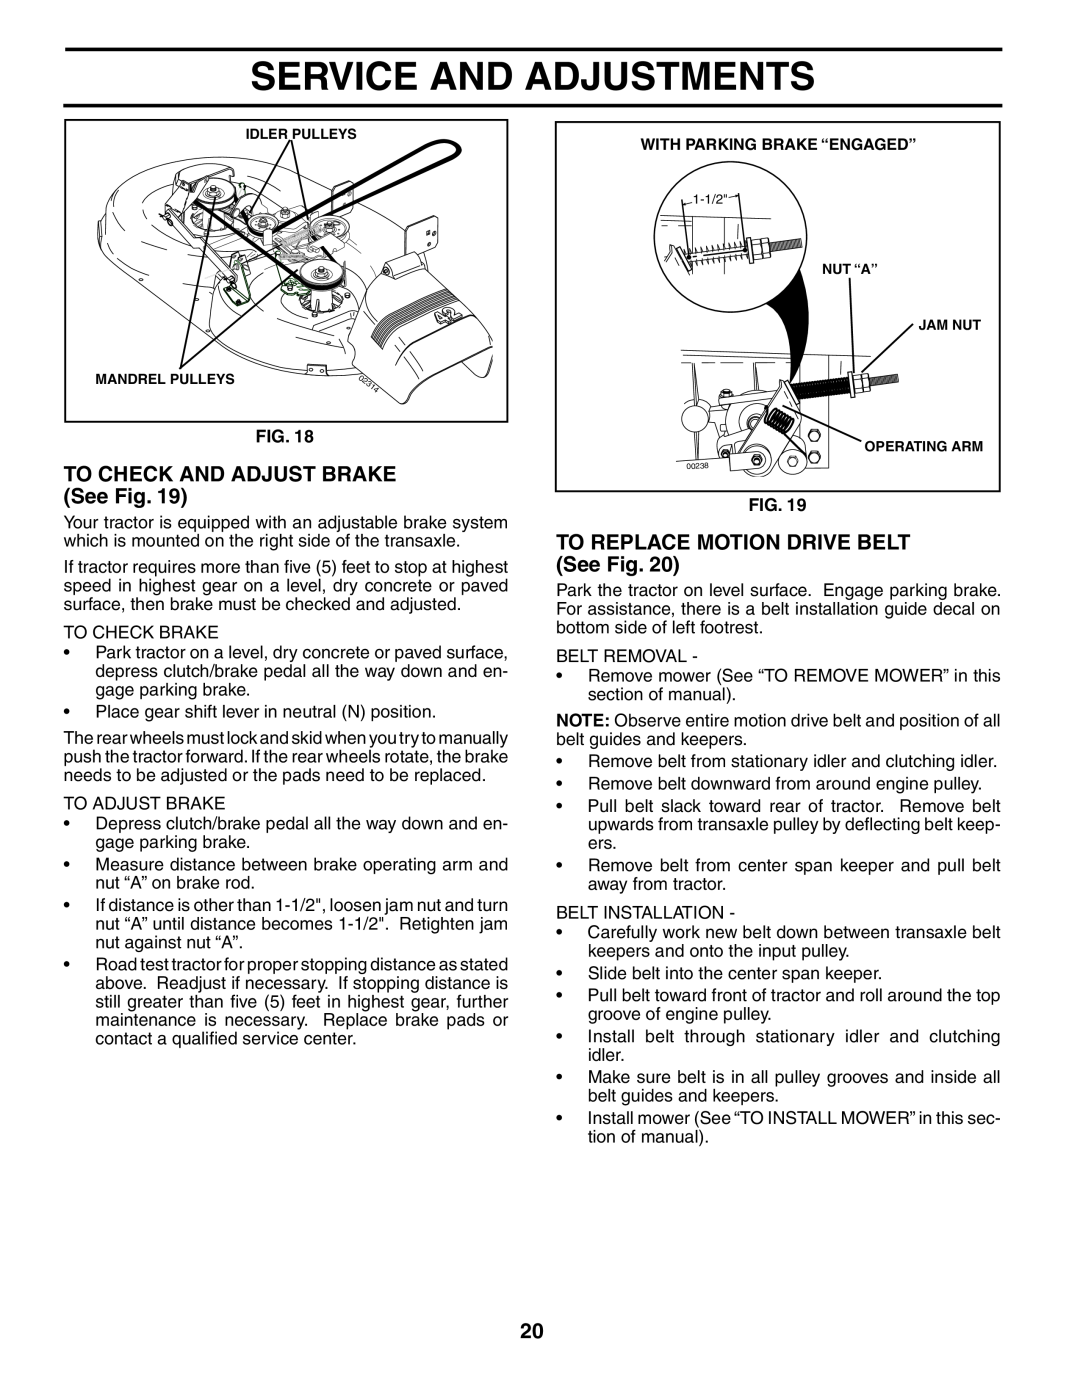 Weed Eater 191064 manual TO CHECK AND ADJUST BRAKE See Fig, TO REPLACE MOTION DRIVE BELT See Fig, Service And Adjustments 